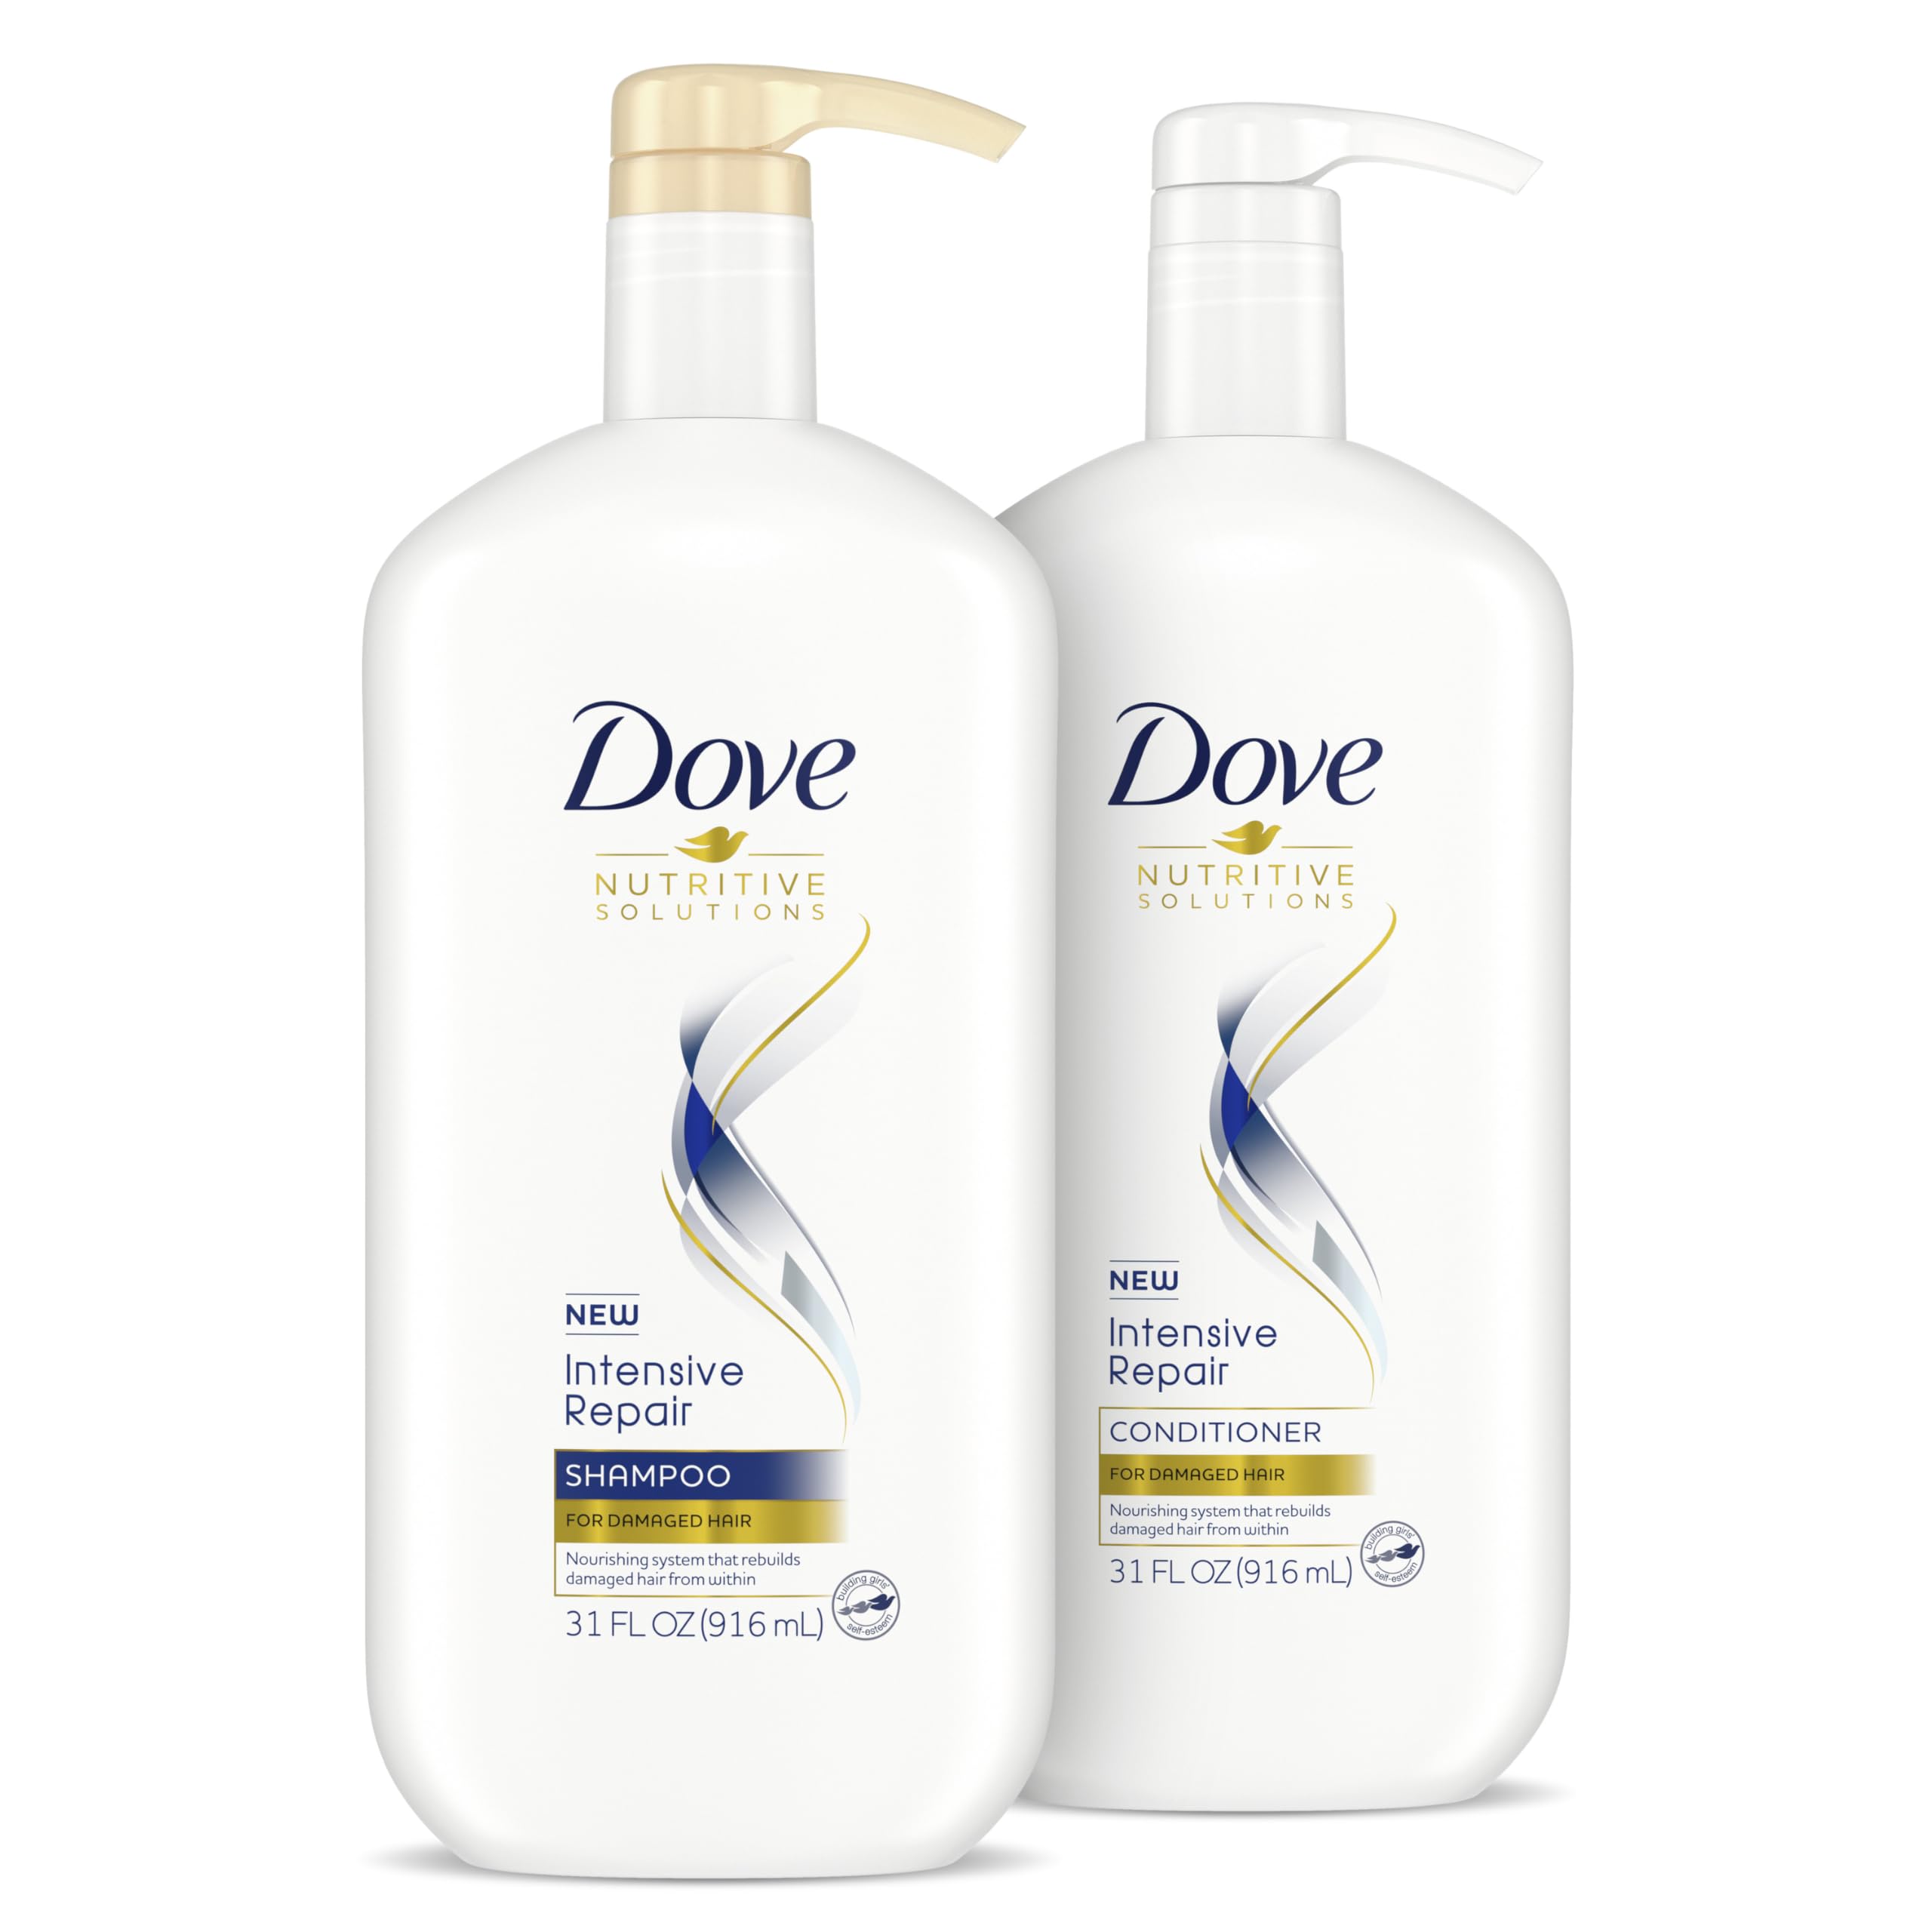 Dove Nutritive Solutions Strengthening Shampoo and Conditioner with Pump Intensive Repair 2 Count for Damaged Hair Dry Hair Shampoo and Deep Conditioner Formulas with Keratin Actives 31 oz